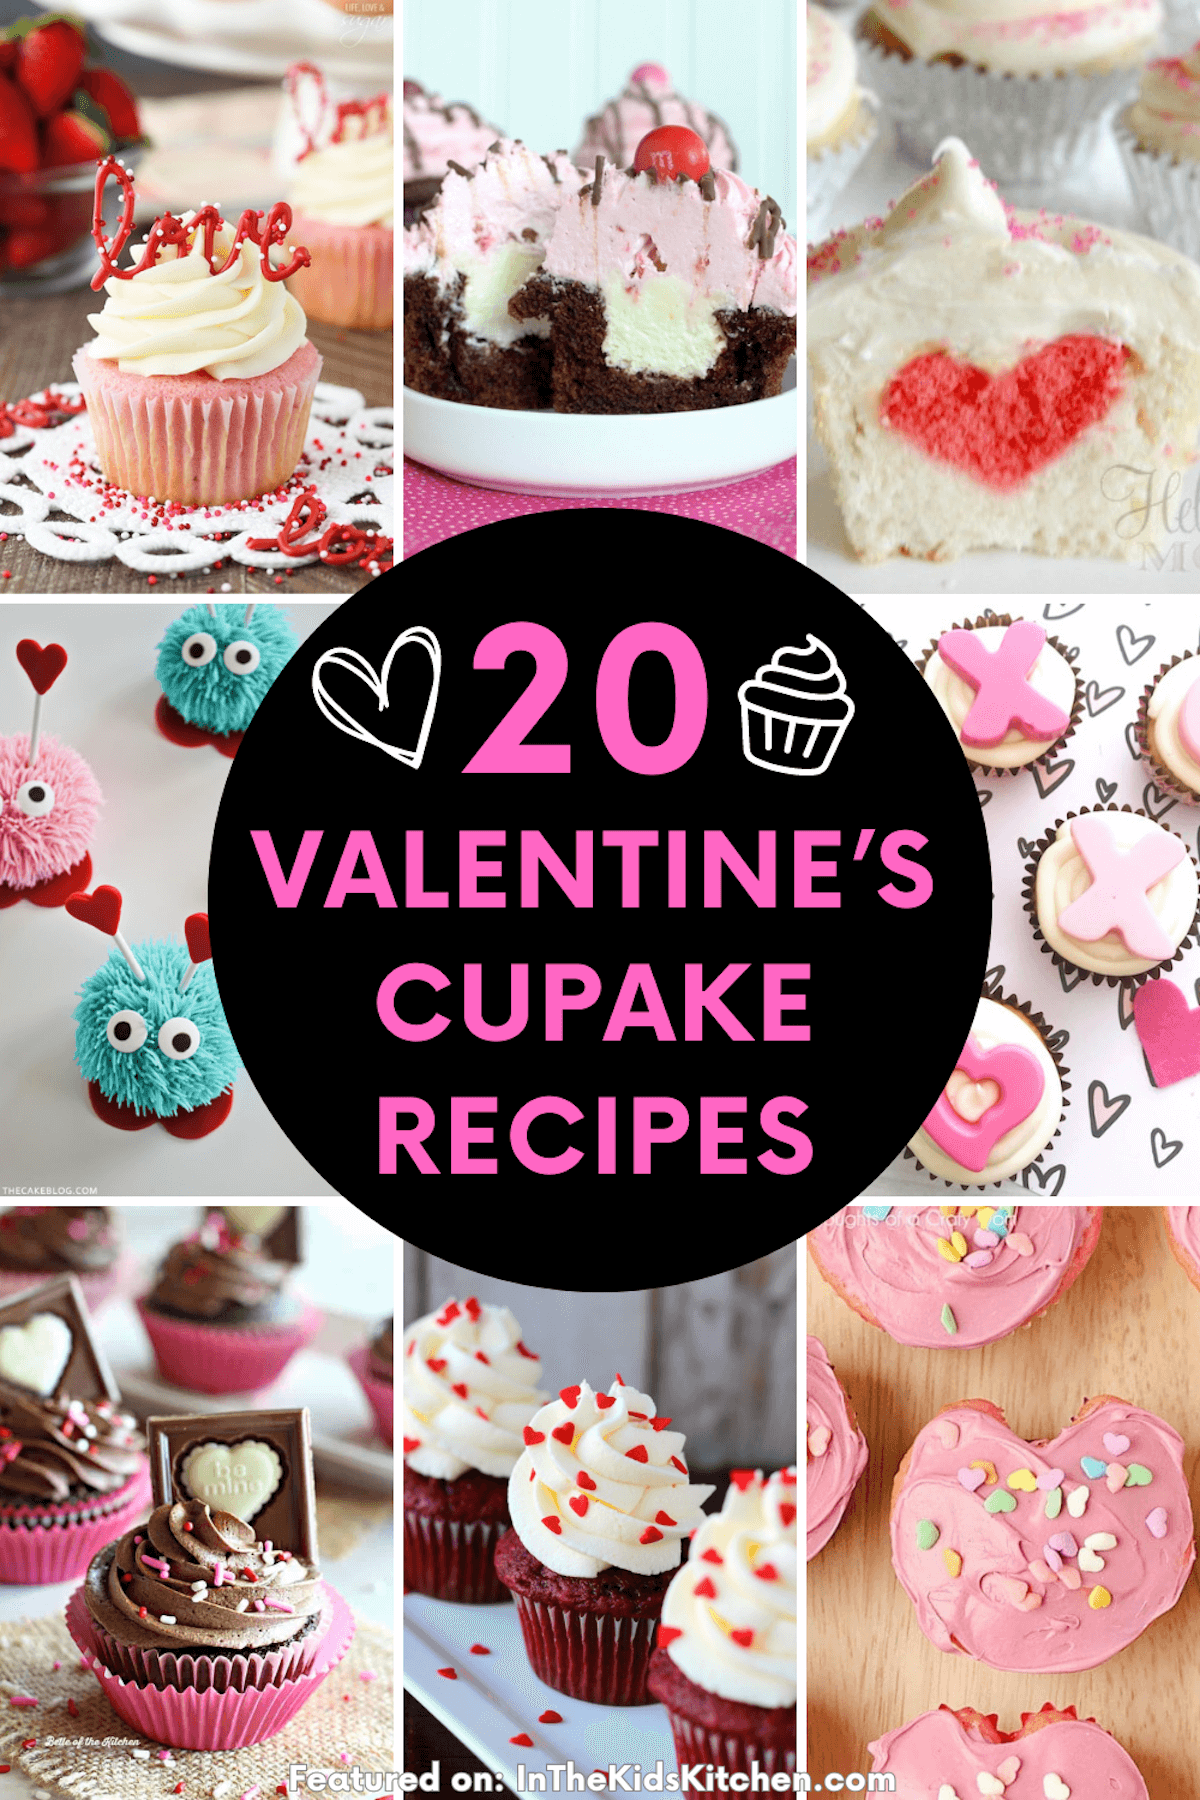 collage of Valentine's Day themed cupcakes, text overlay "20 Valentine's Cupcake Recipes".